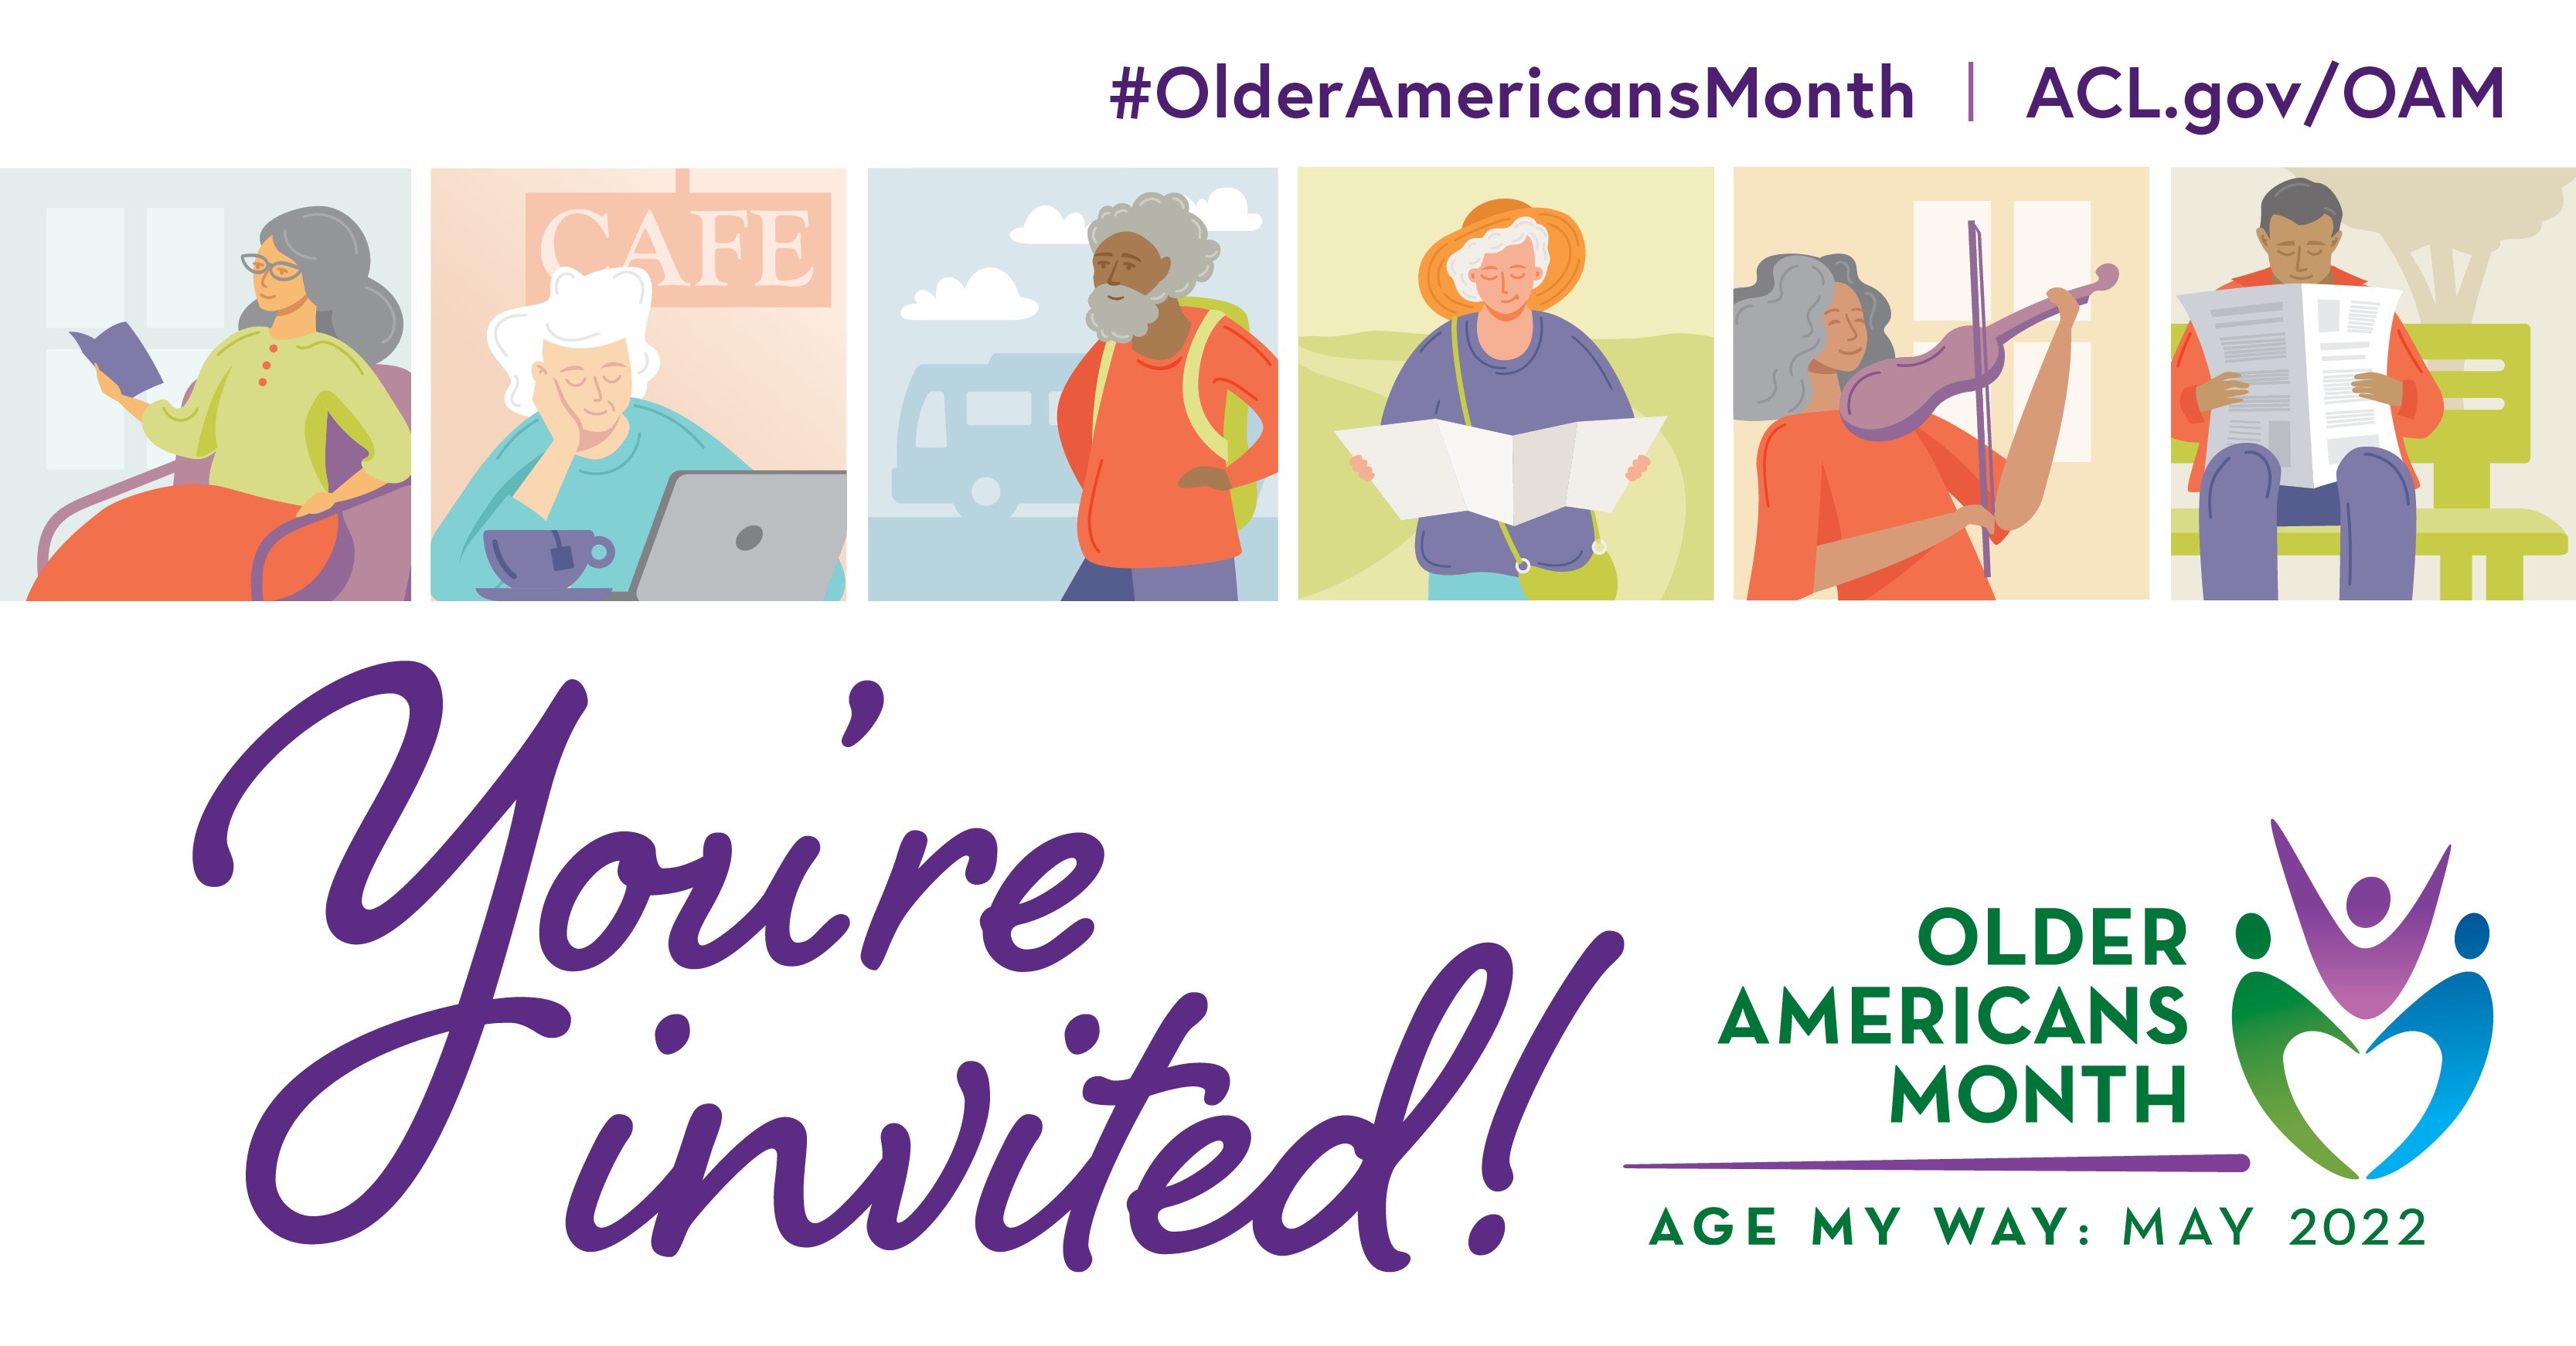 You're Invited. Older Americans Month, Age My Way: May 2022. #OlderAmericansMonth ACL.gov/OAM